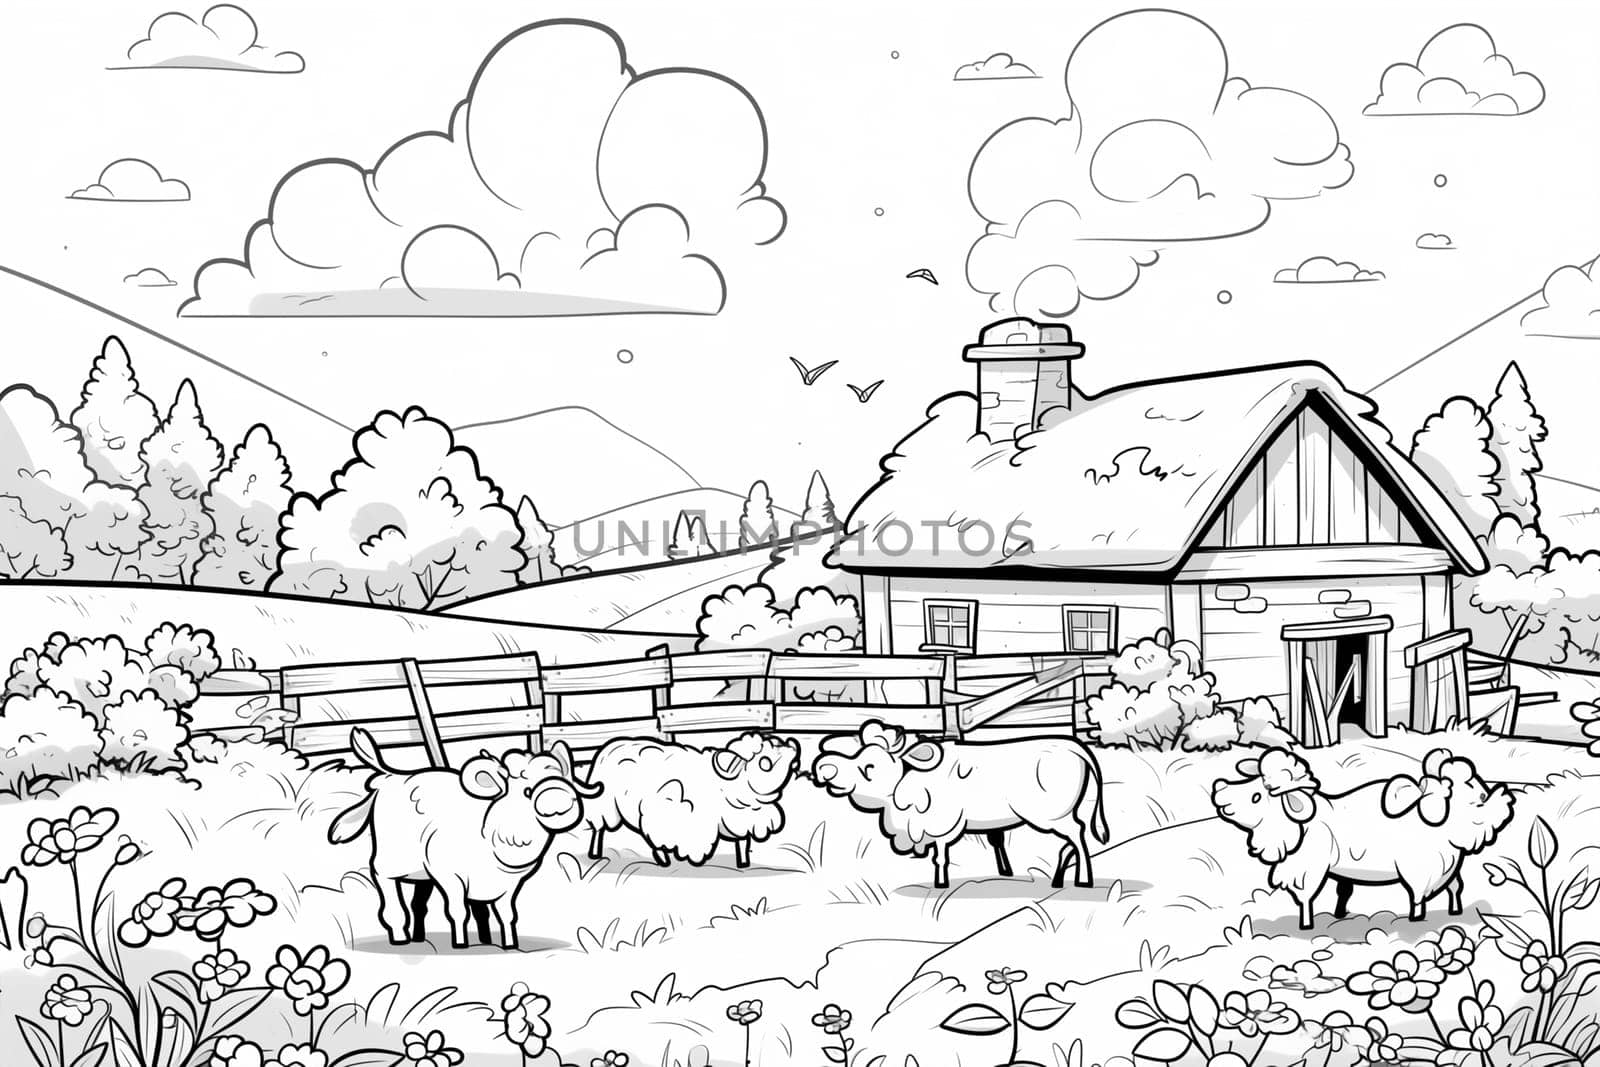 Coloring Page of Sheep and House in the Countryside by Sd28DimoN_1976